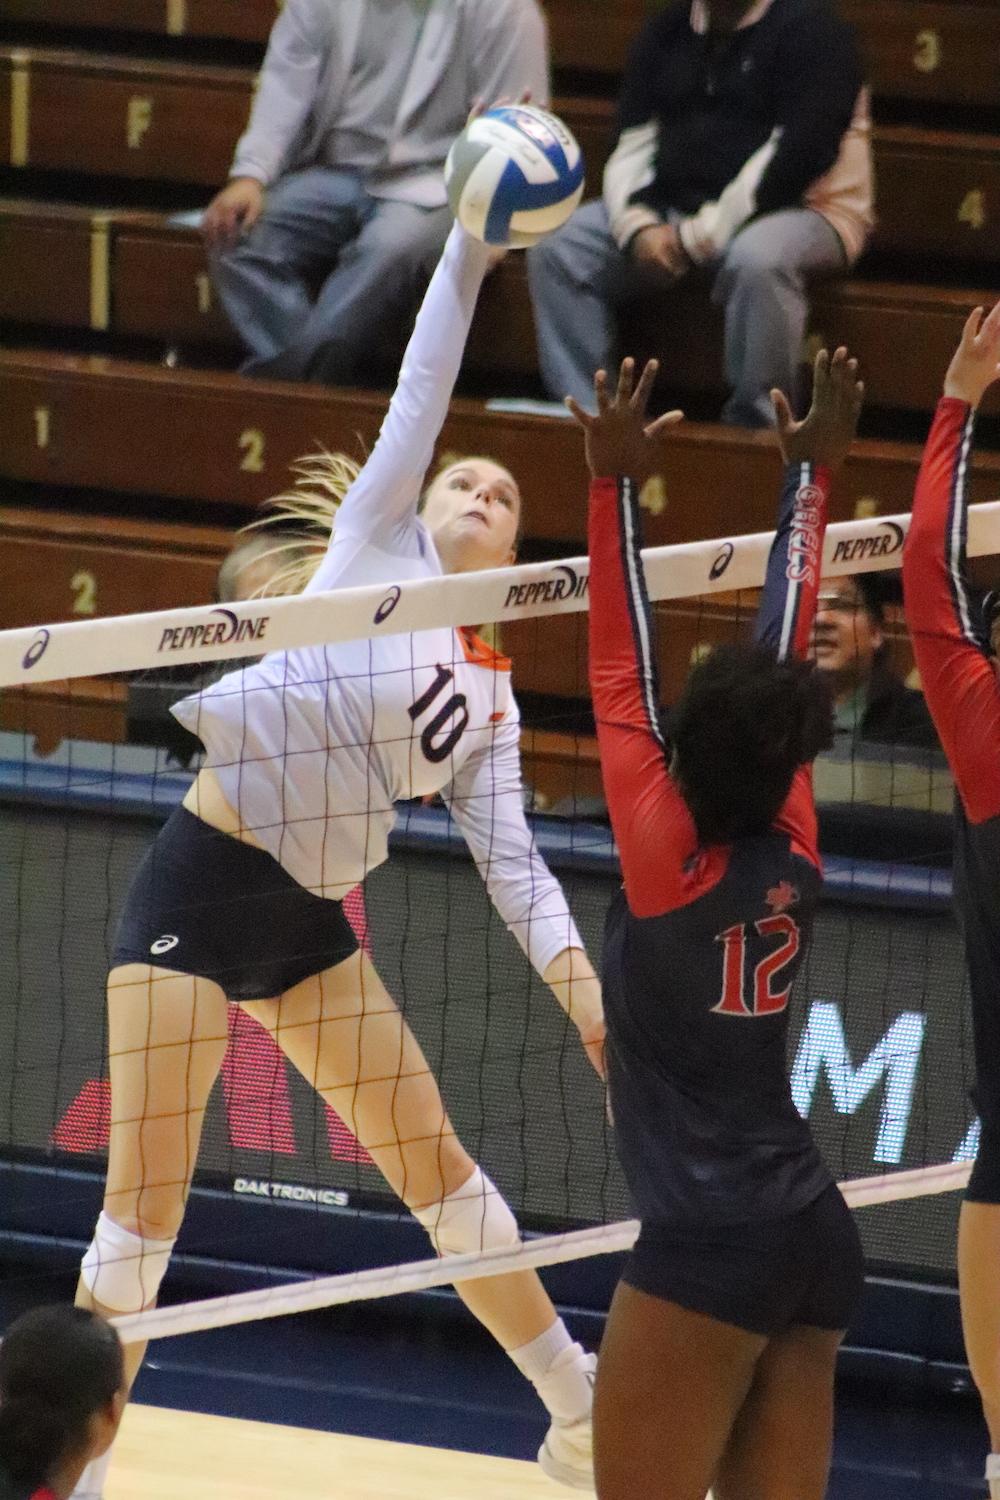 Senior outside hitter Shannon Scully goes up for a kill against a blocker from Saint Mary's University on Nov. 14, 2019. The Waves swept the Gaels at home for their eleventh league win. File photo